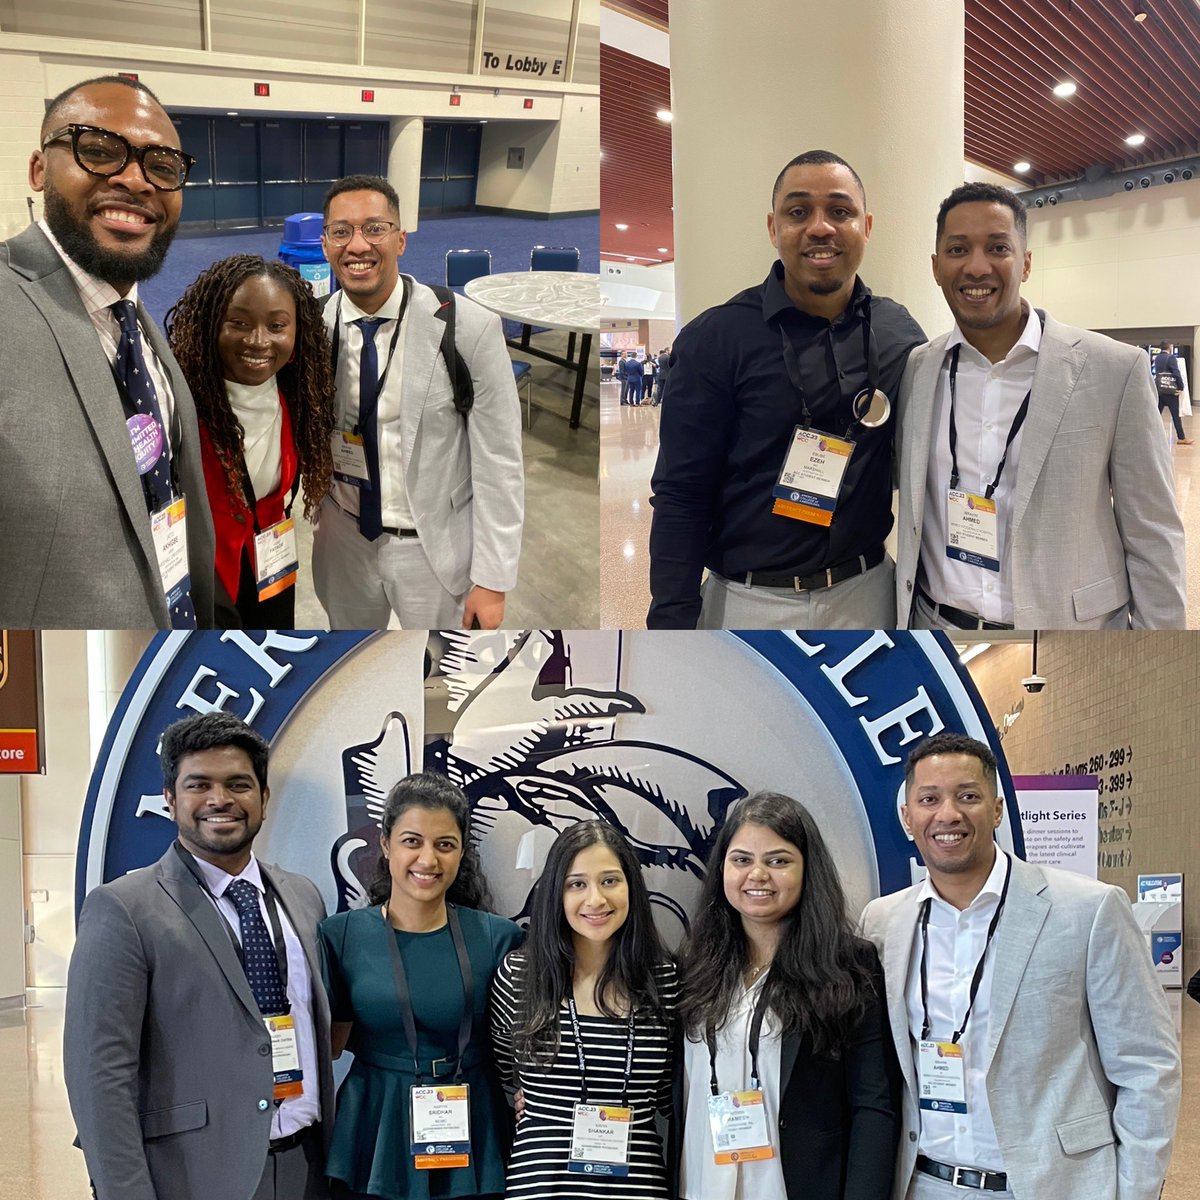 I had an amazing time at #ACC23/#WCCardio in NOLA. I learned a lot new things and met so many new friends. Thank you @ABCardio1 for the travel award, I learned a great deal from all the mentors at #ABCardioACC23, Can’t wait for @ACCinTouch 24
#CardioTwitter #cardioonc @MCMC_IMres